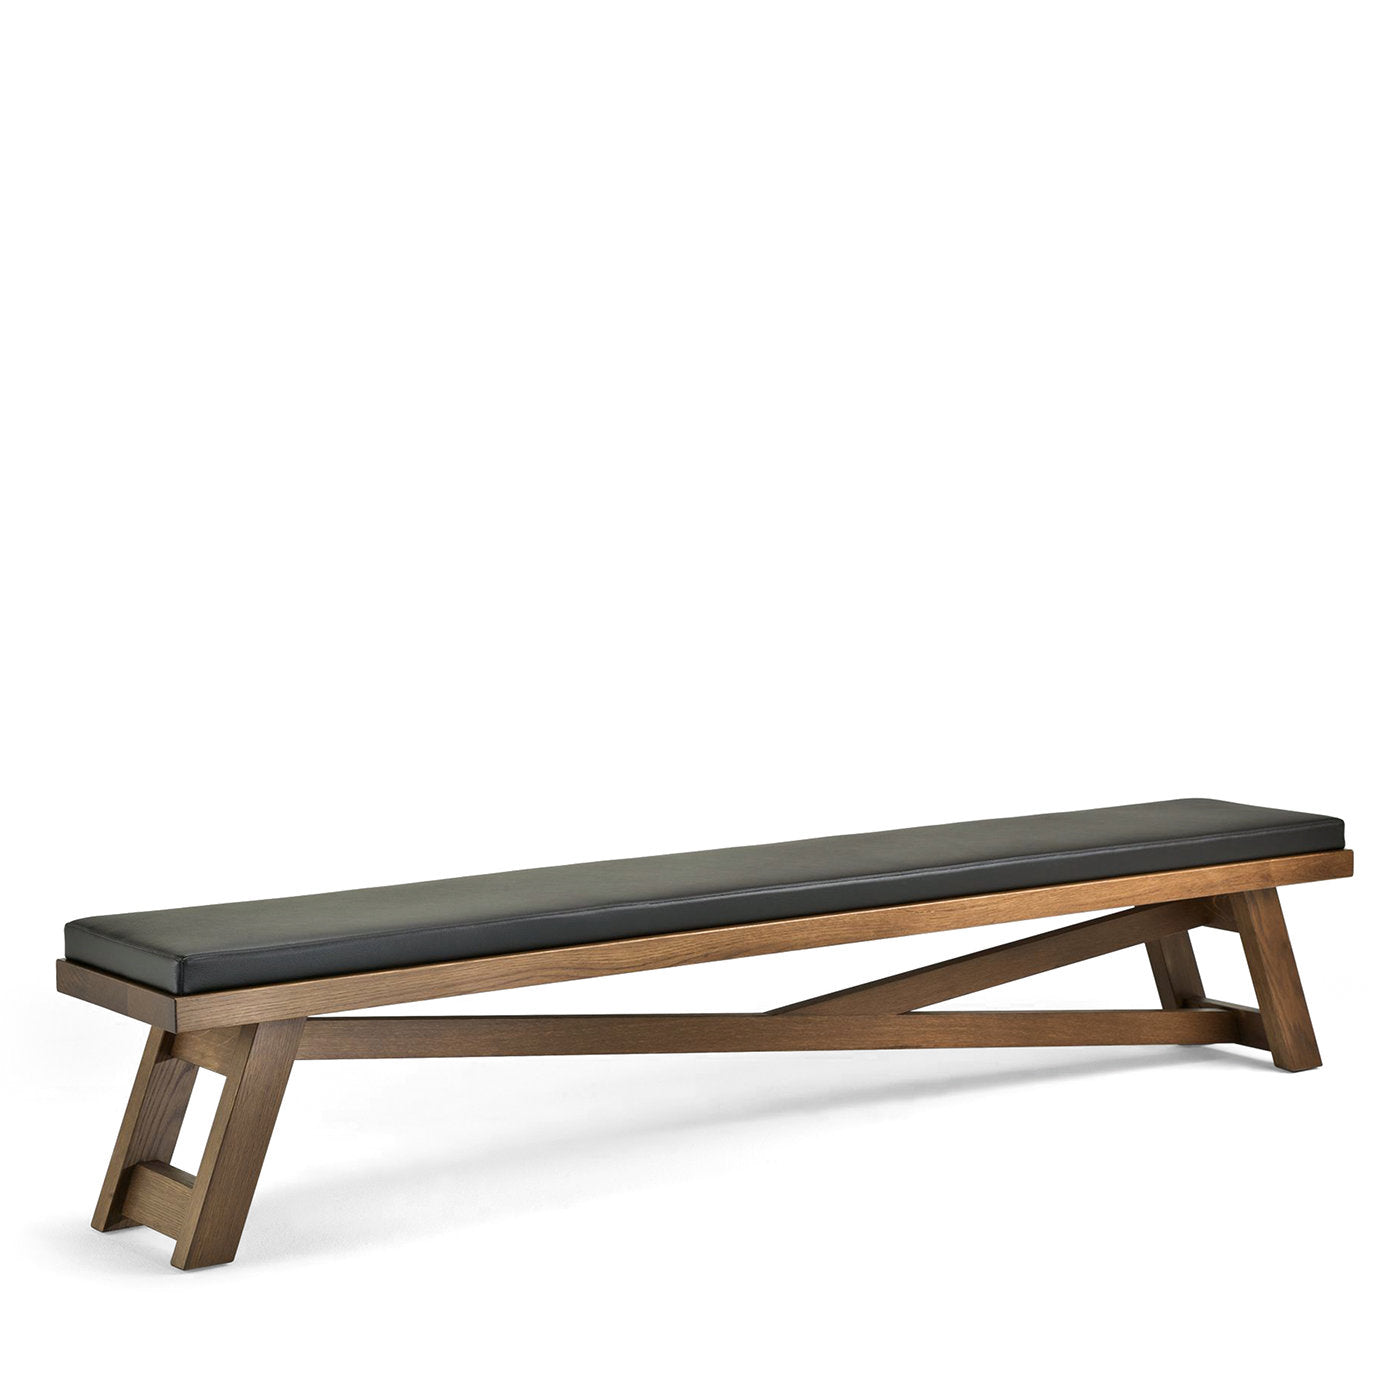 Silvanus Upholstered Bench by Archer and Humphryes - Alternative view 1